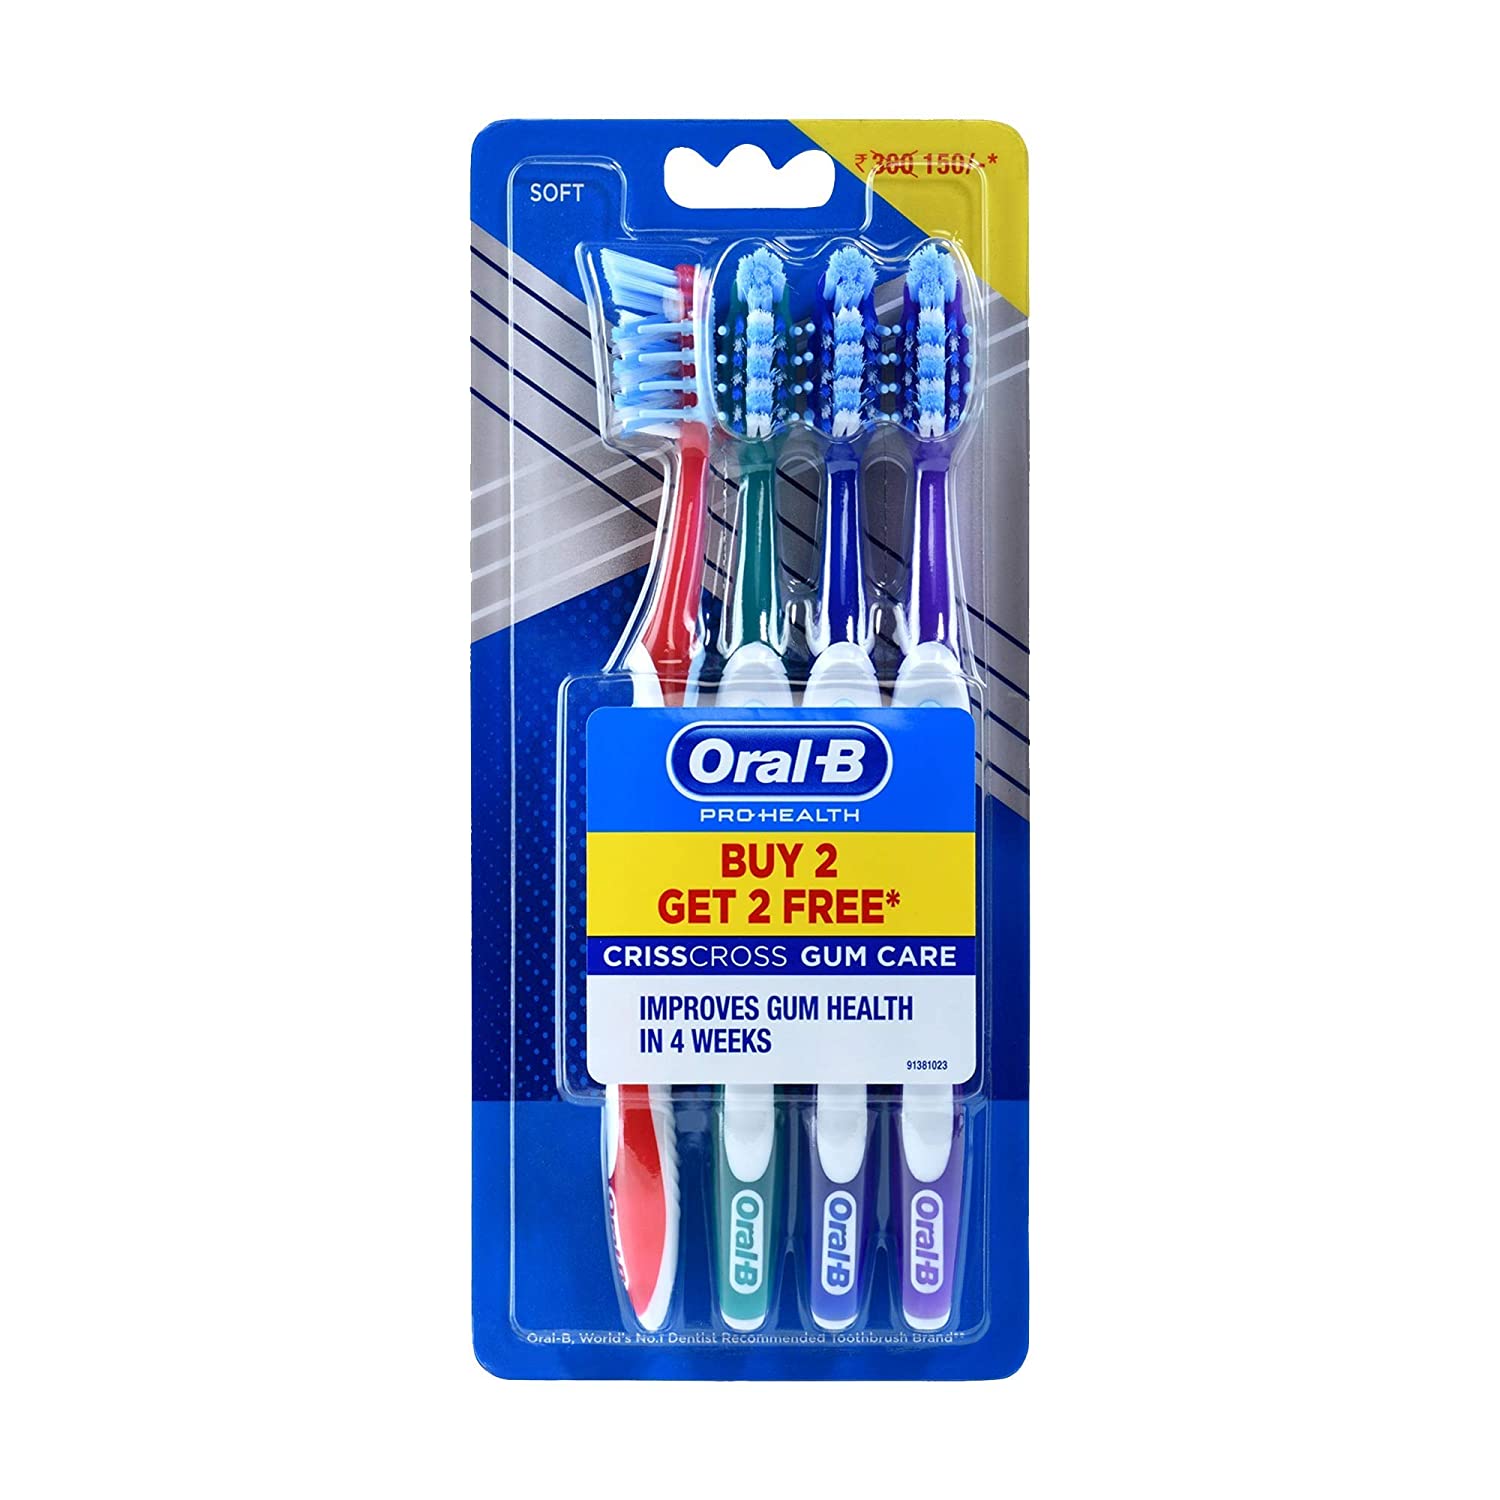 Buy Oral-B Pro-Health Criss Cross Gum Care Toothbrush, 4 Count (Buy 2, Get 2 Free) Online